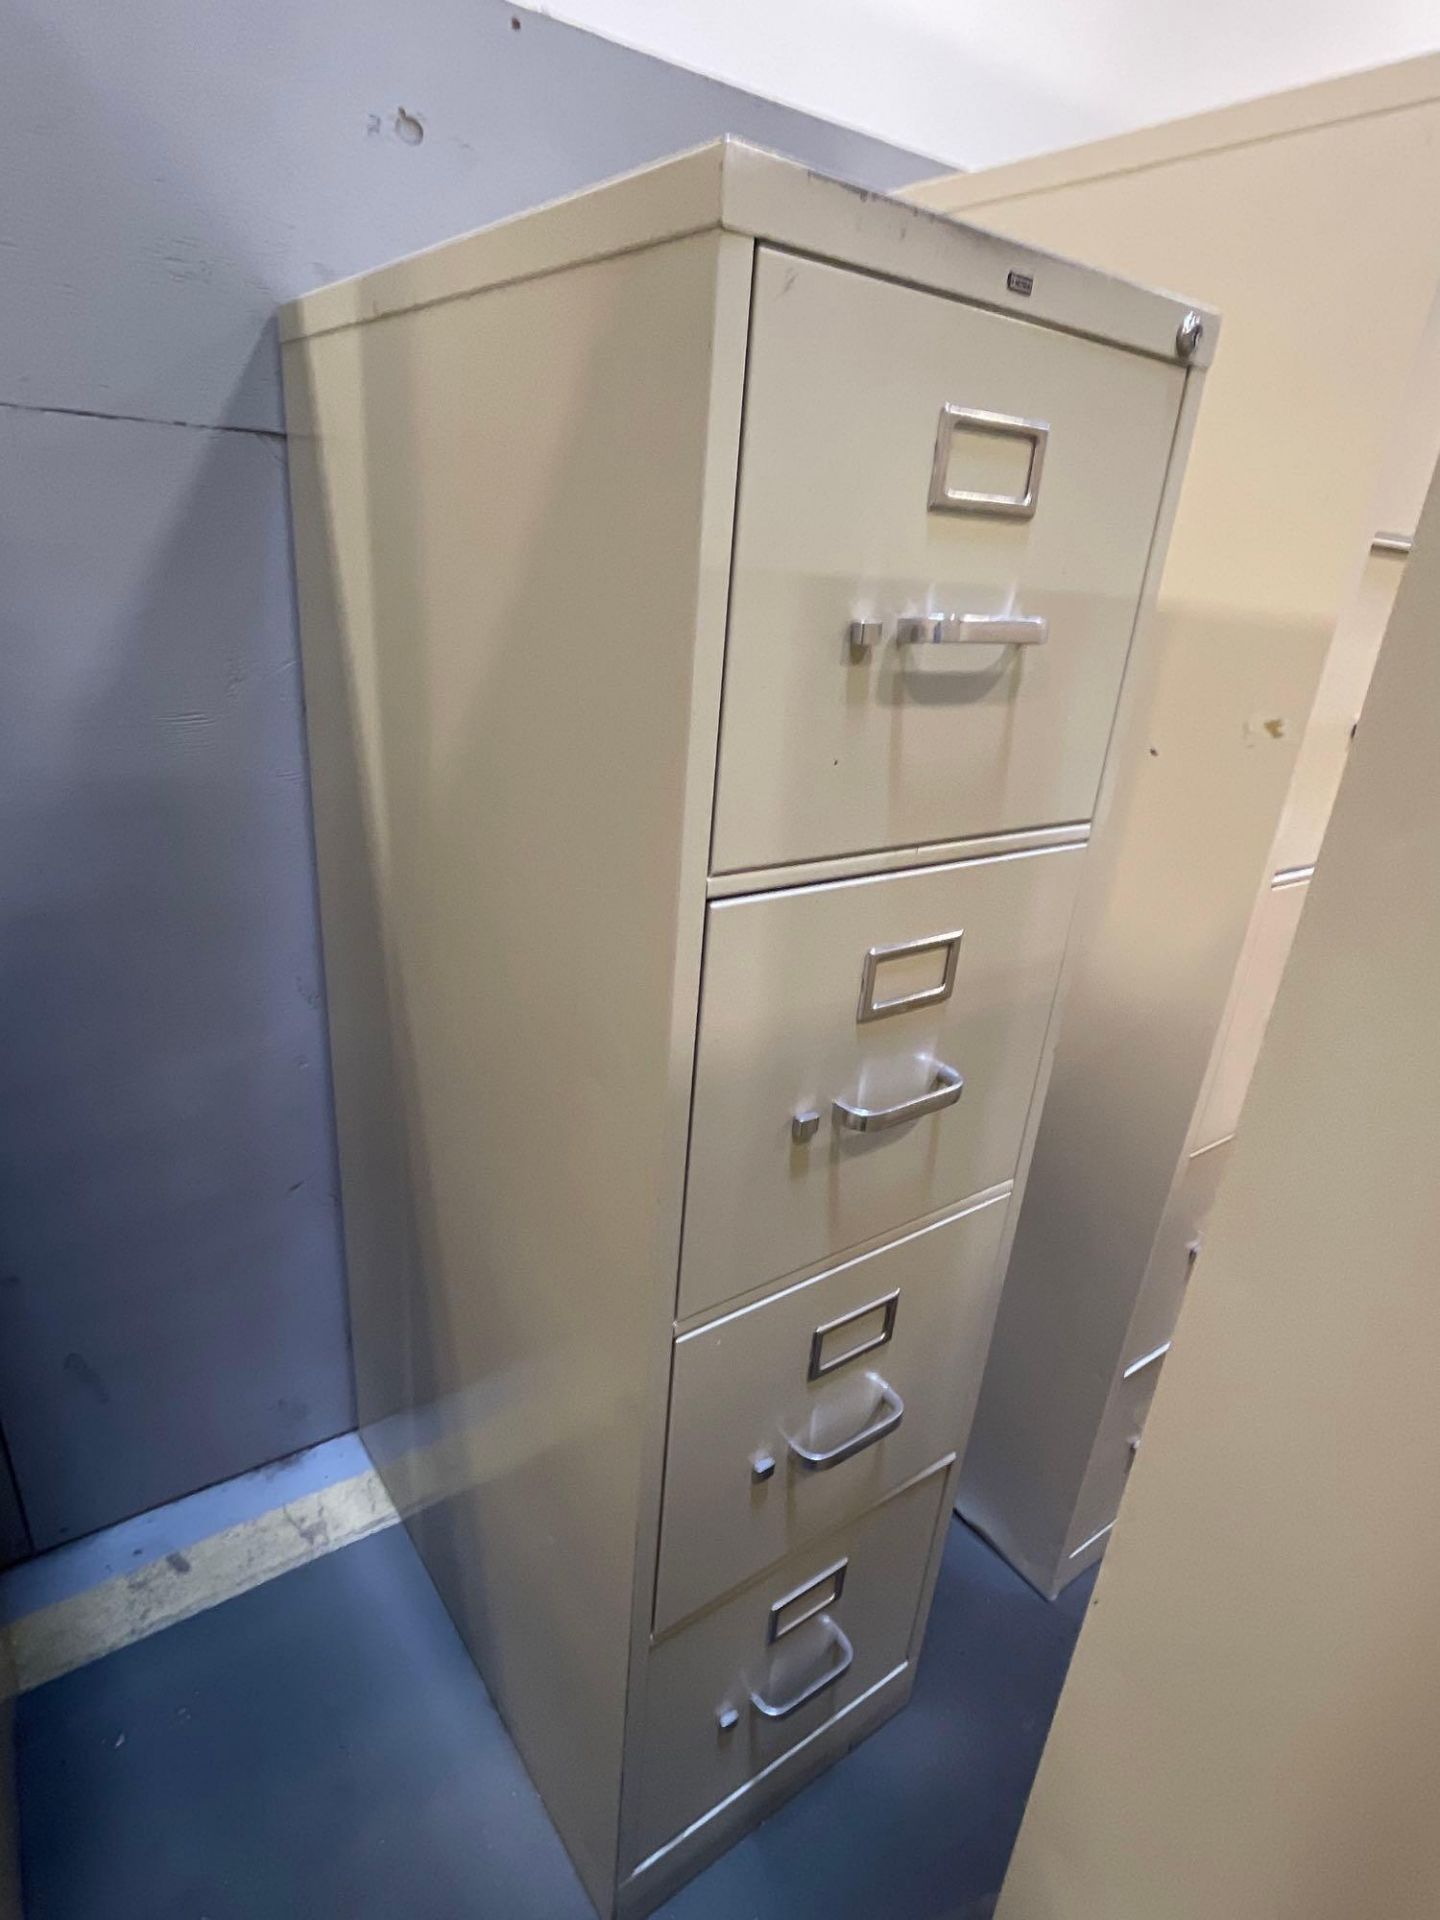 Lot of 6 Hon File Cabinets: (3) 29" X 15" X 52", (2) 26" X 18" X 52", (1) 26" X 15" X 60" - Image 6 of 7